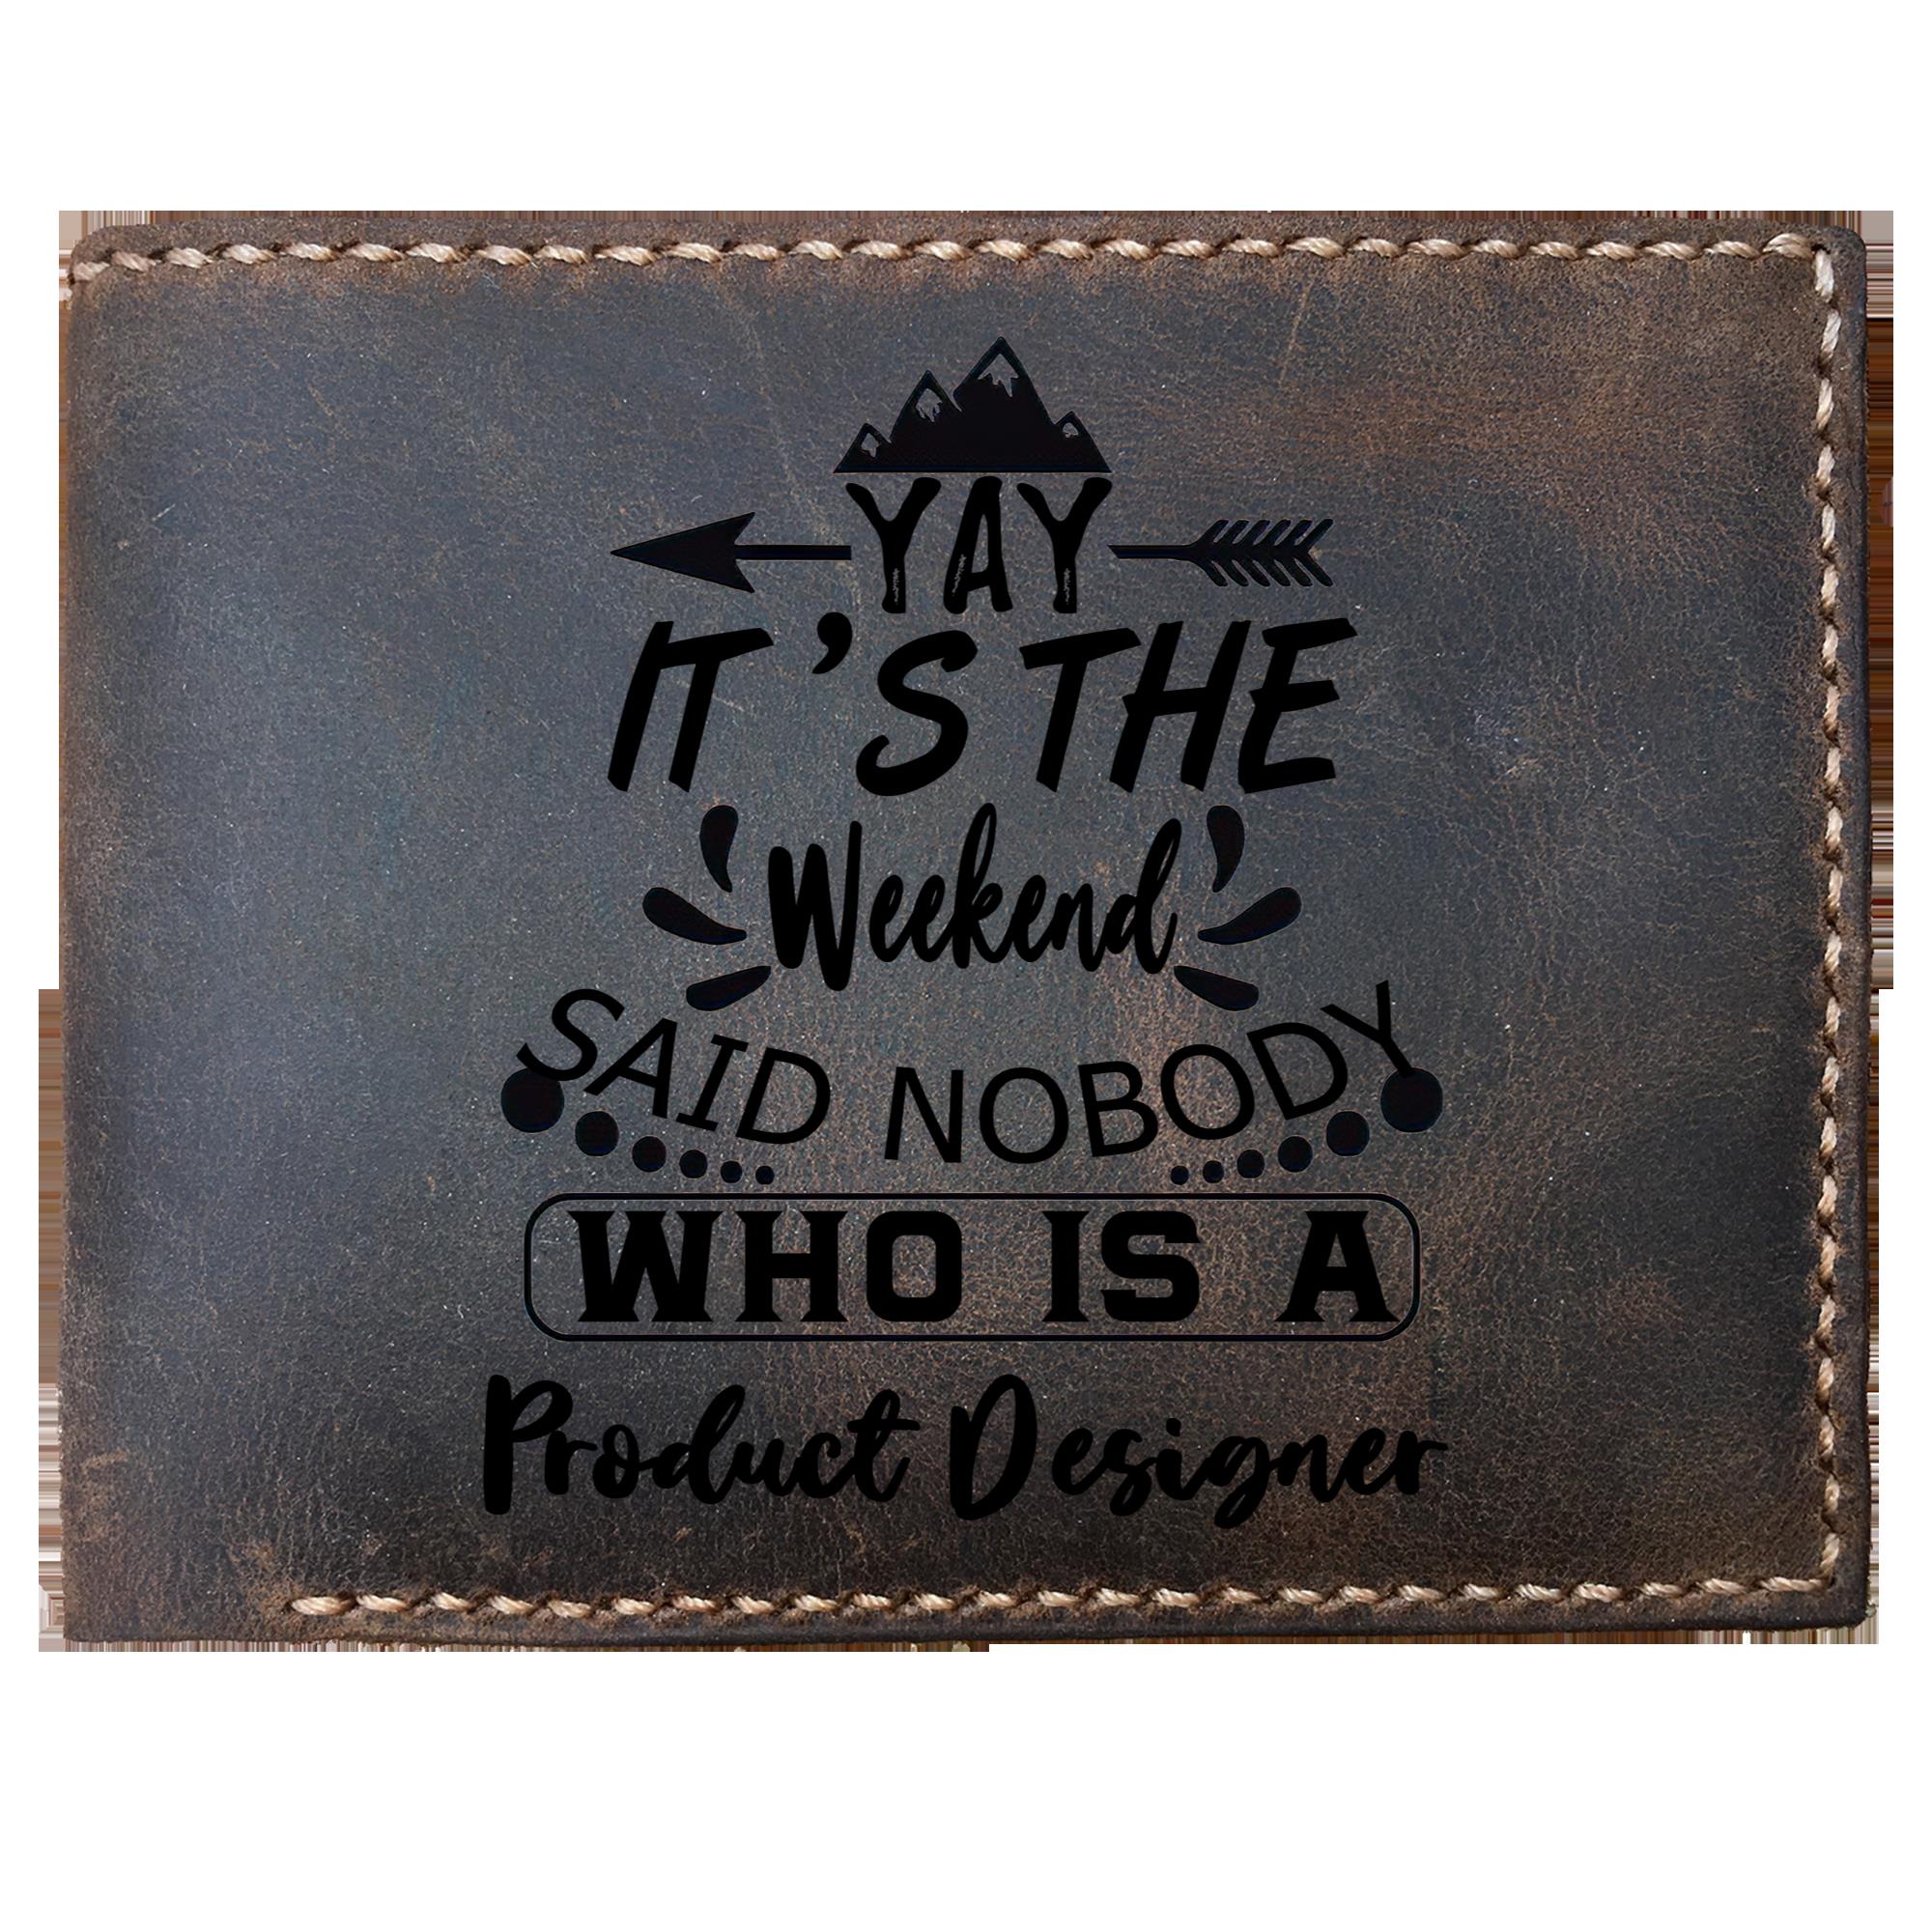 Skitongifts Funny Custom Laser Engraved Bifold Leather Wallet For Men, It's The Weekend Said Nobody Who Is A Product Designer, Father's Day Gifts